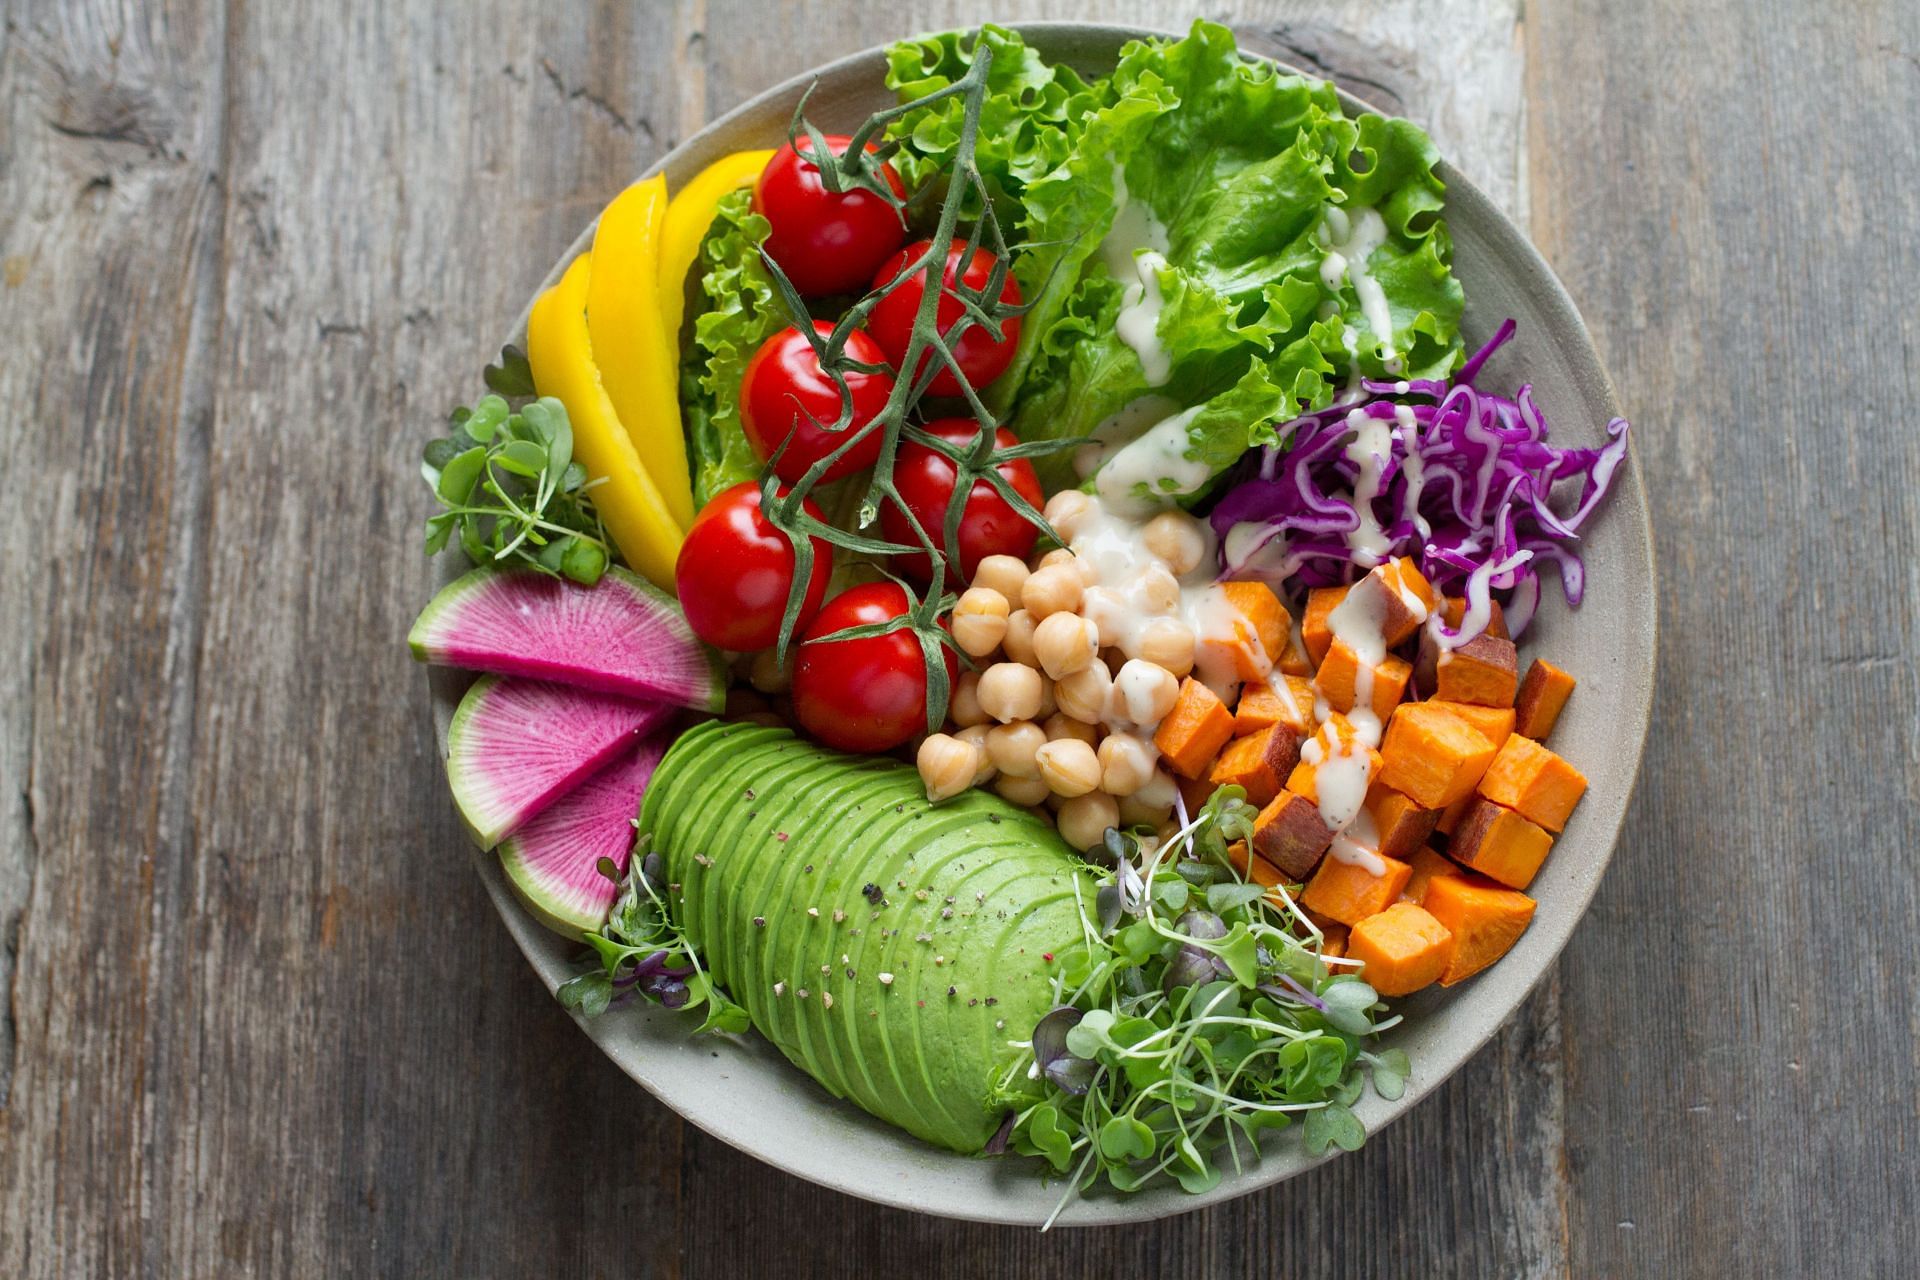 Plant-based diet can be beneficial to health (Image via Unsplash/Anna Pelzer)